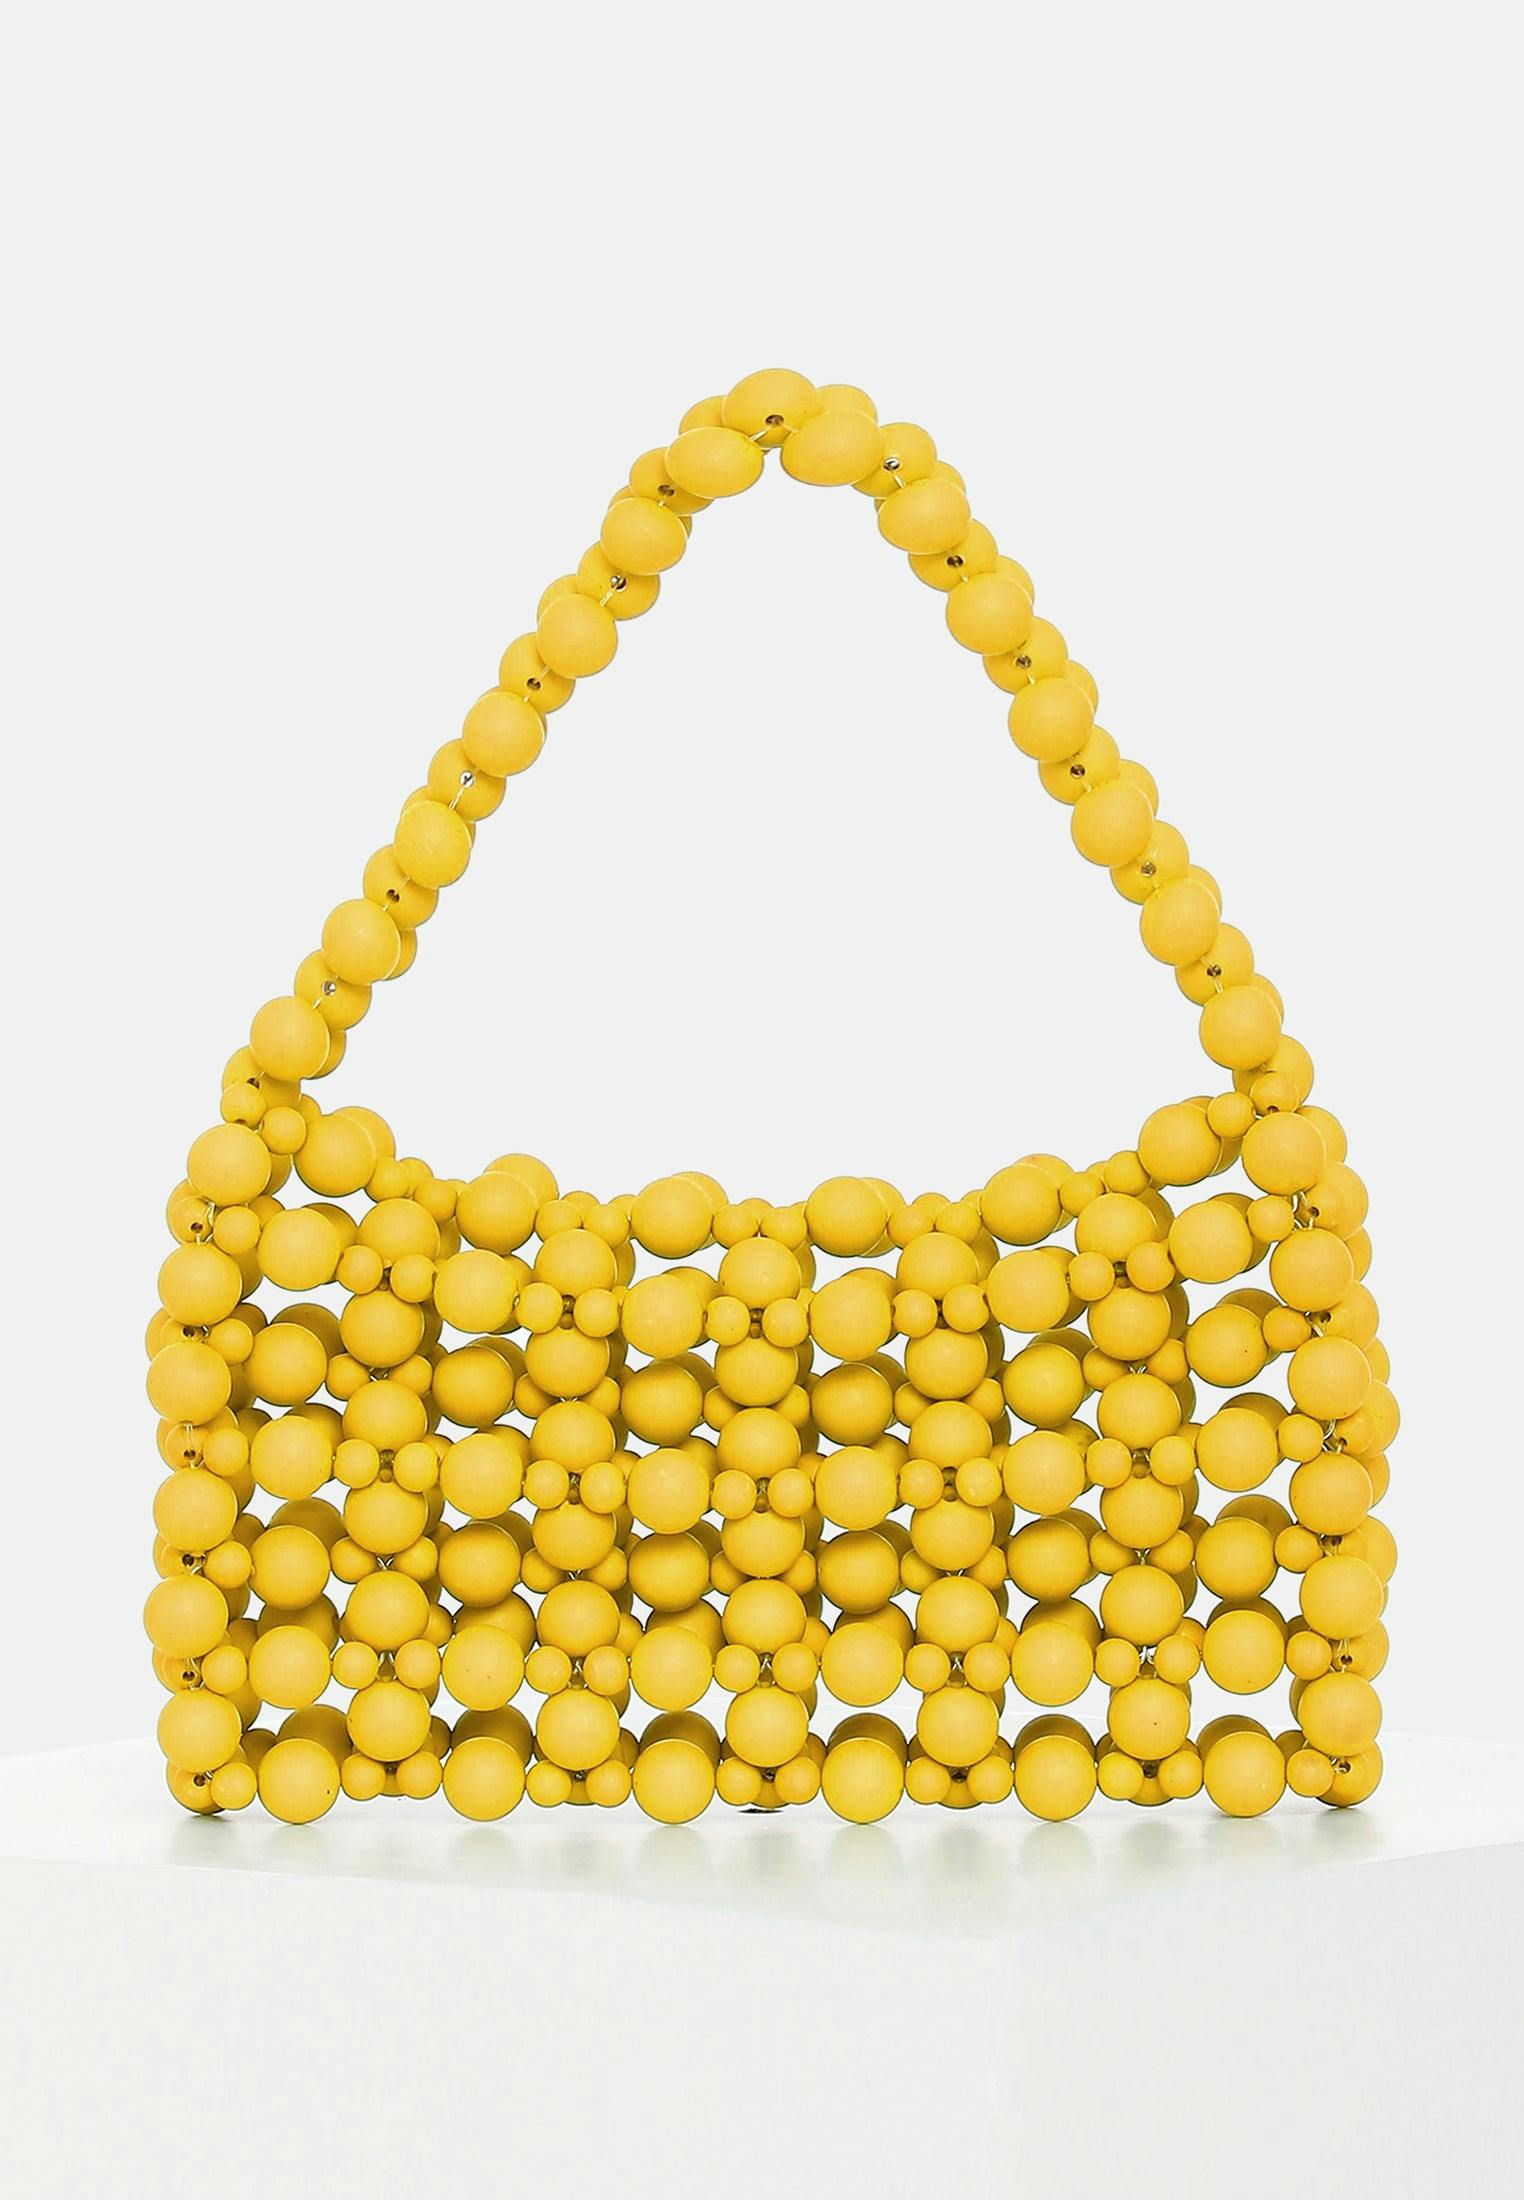 Golden Amber Beaded Mini Bag, a product by Lola's